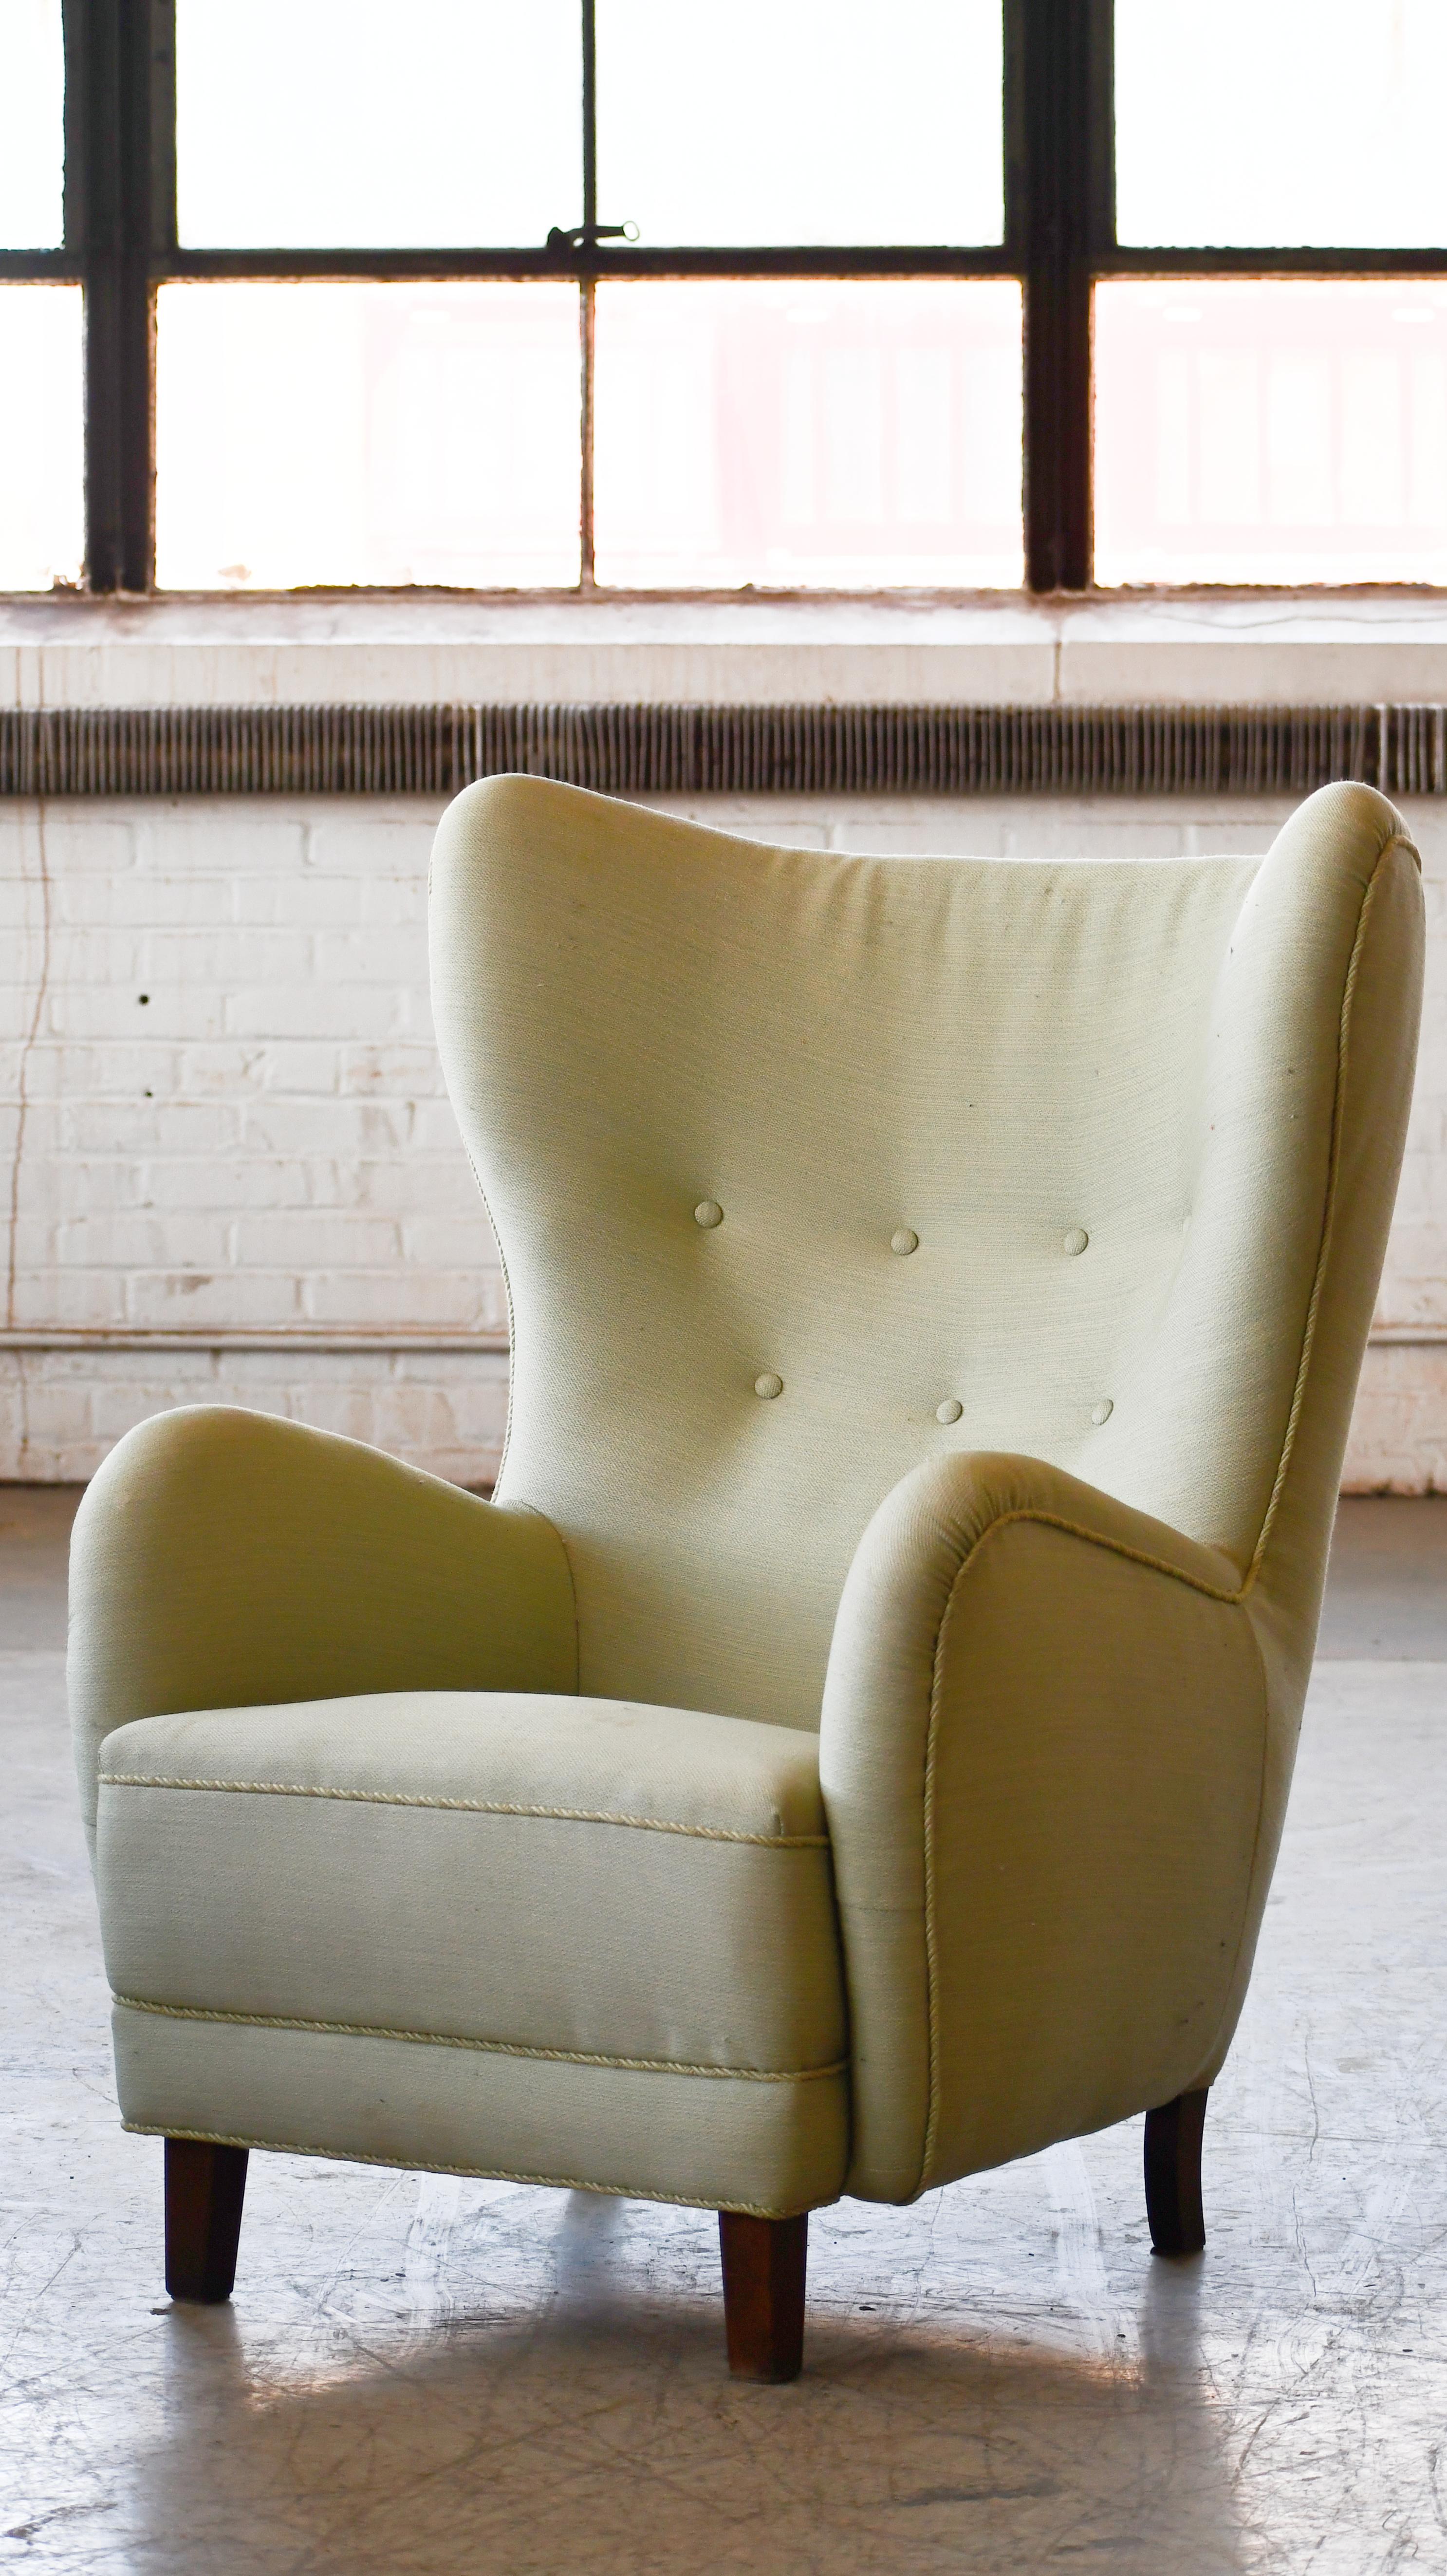 Danish High Back Lounge Chair Attributed to Flemming Lassen Denmark 1940's For Sale